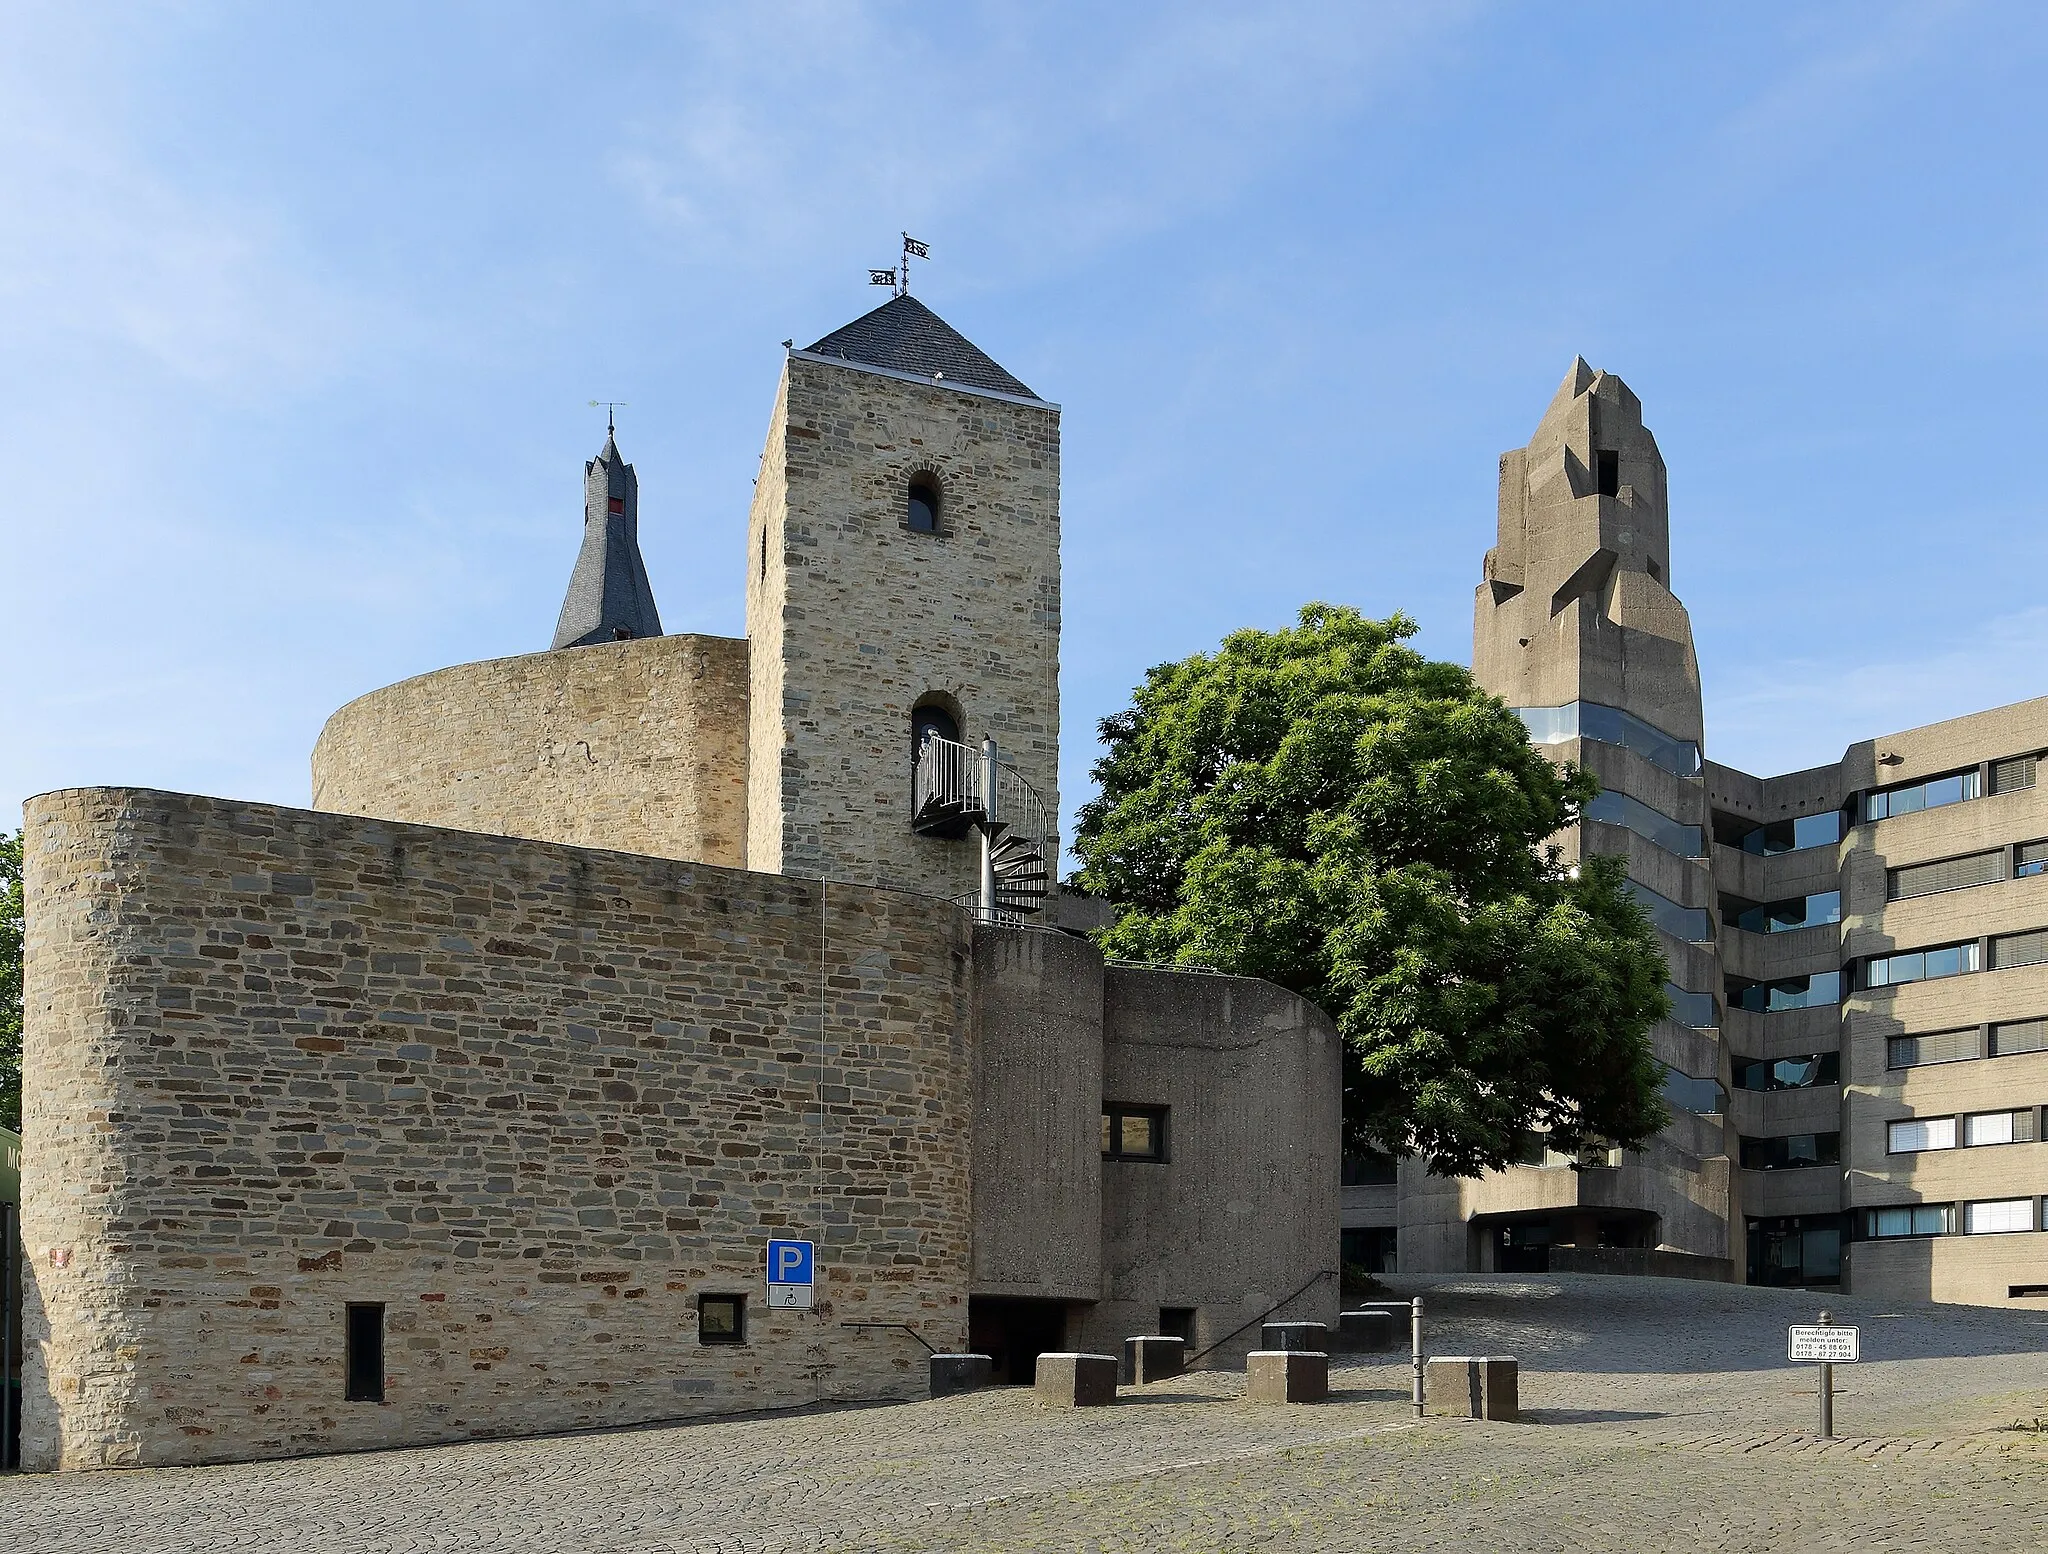 Photo showing: This is a photograph of an architectural monument. It is on the list of cultural monuments of Bergisch Gladbach, no. 19.
Bensberg City Hall, Bergisch Gladbach, NRW, Germany, consists of a medieval castle and a brutalist annex, built from 1962–1969. The annex was designed by Gottfried Böhm, a Pritzker Prize winning architect from Cologne.